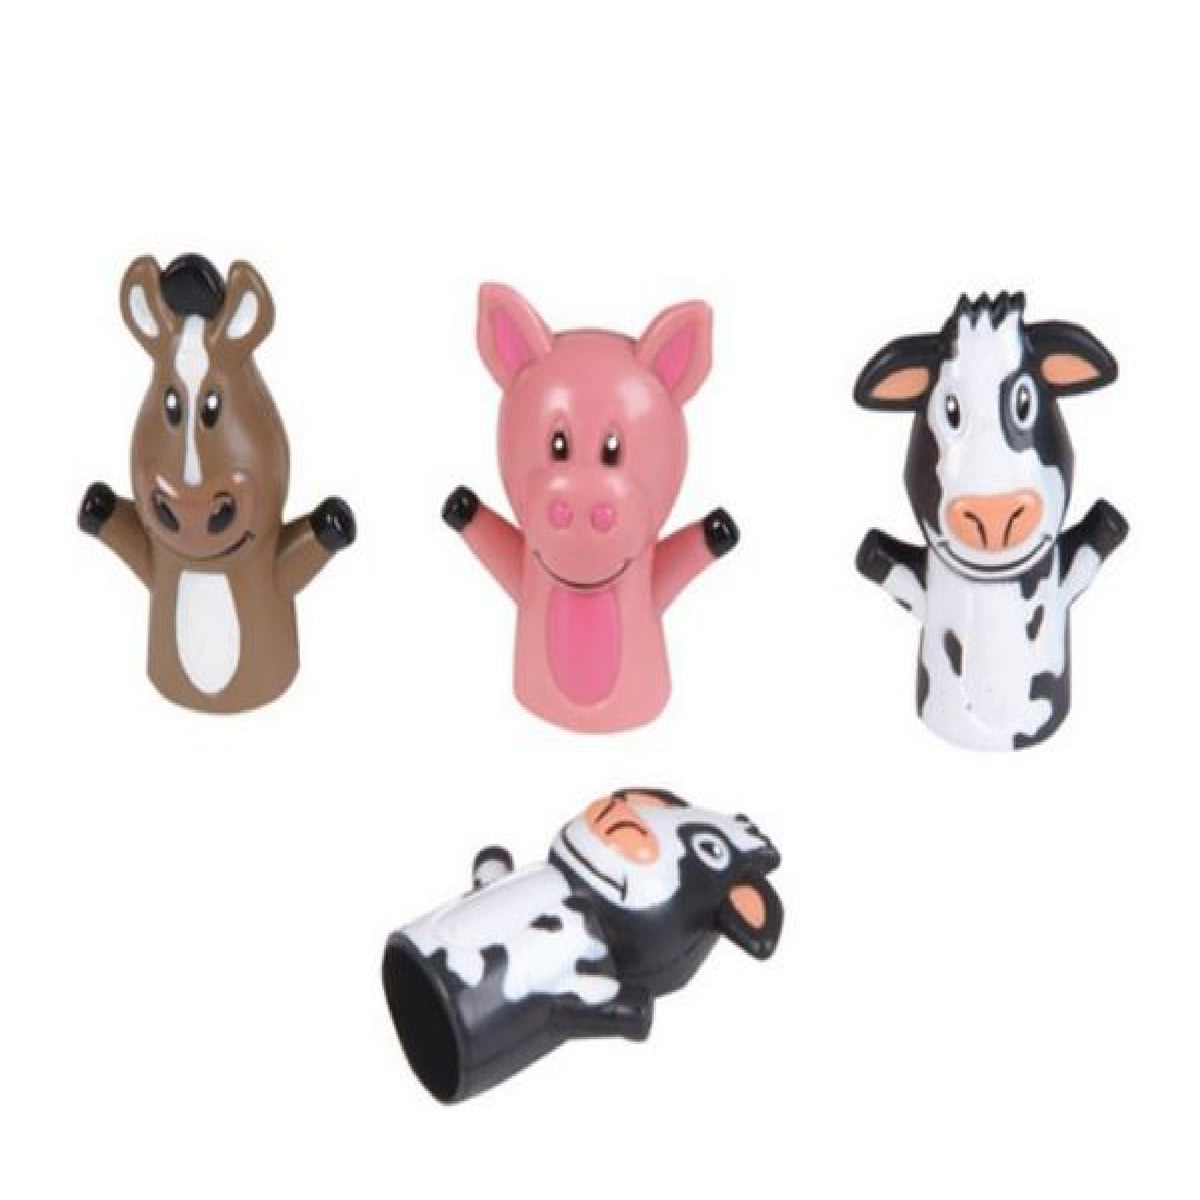 Farm Animals Finger Puppets kids toys In Bulk- Assorted